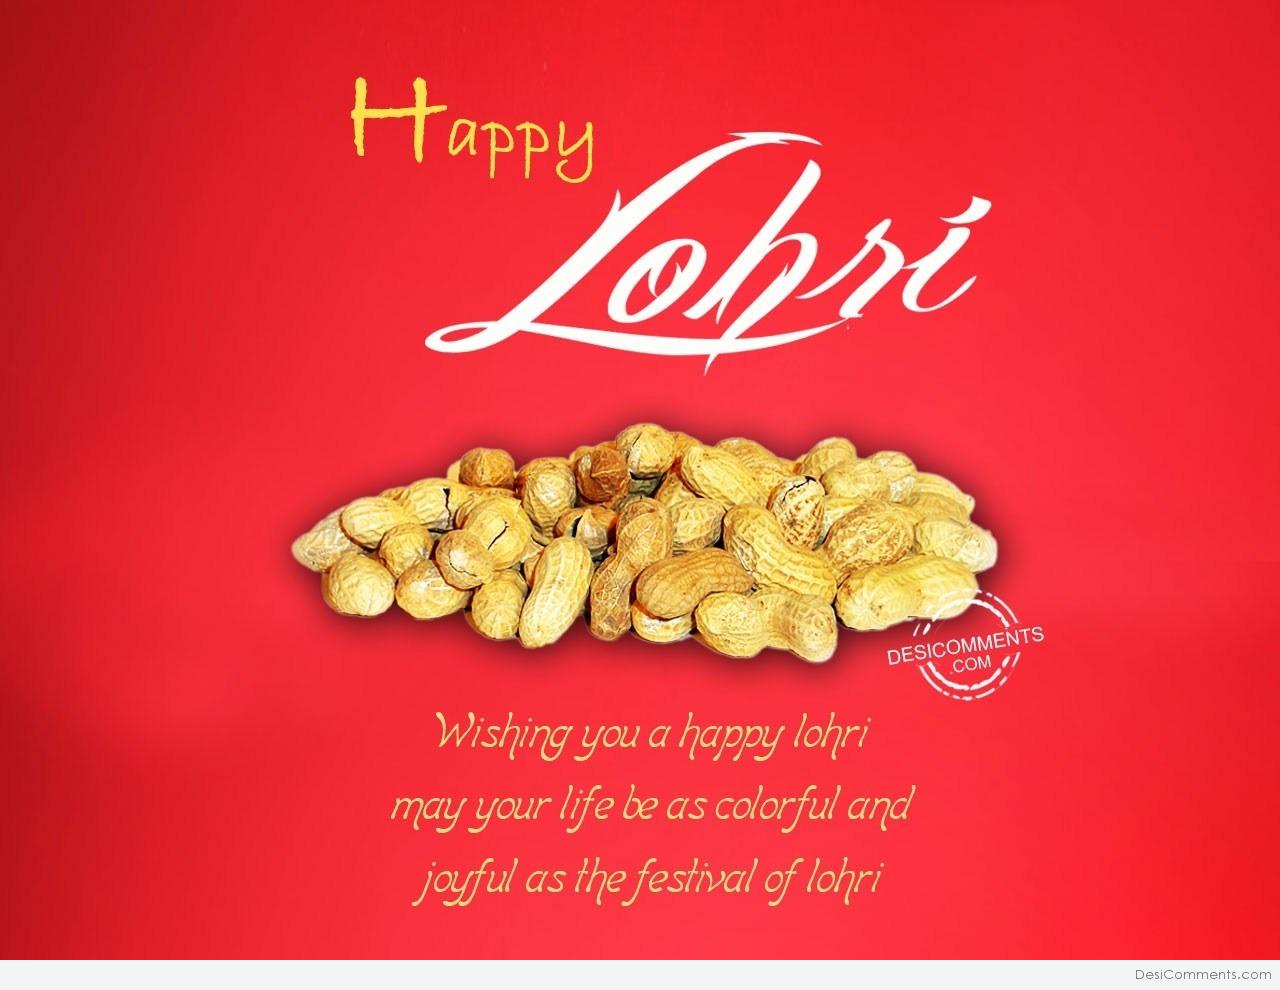 Happy Lohri Wishing You A Happy Lohri May Your Life Be As Colorful And Joyful As The Festival Of Lohri